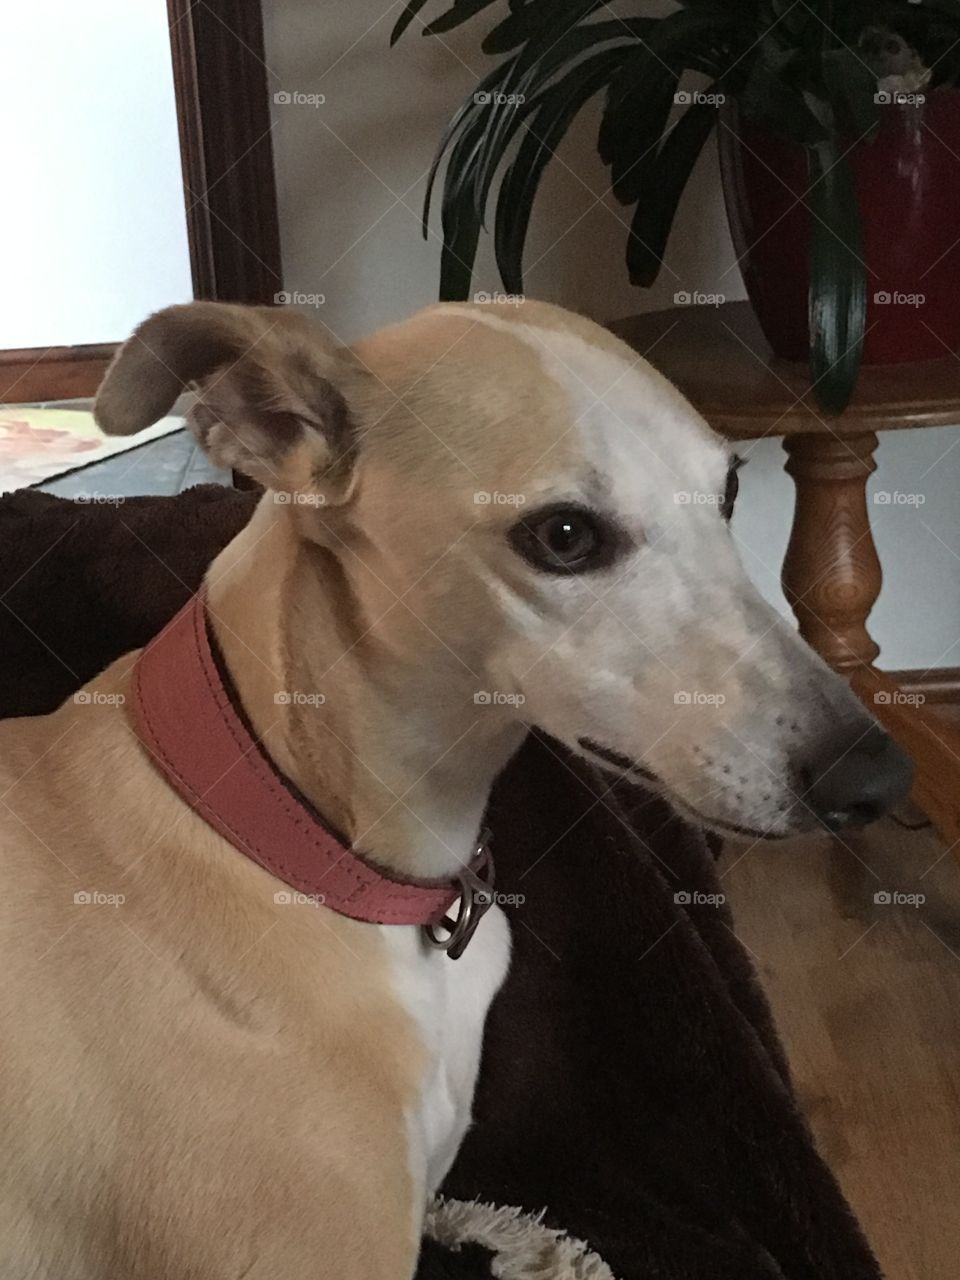 Hennie the cream fawn whippet dog, relaxing on the sofa, looking out the window 